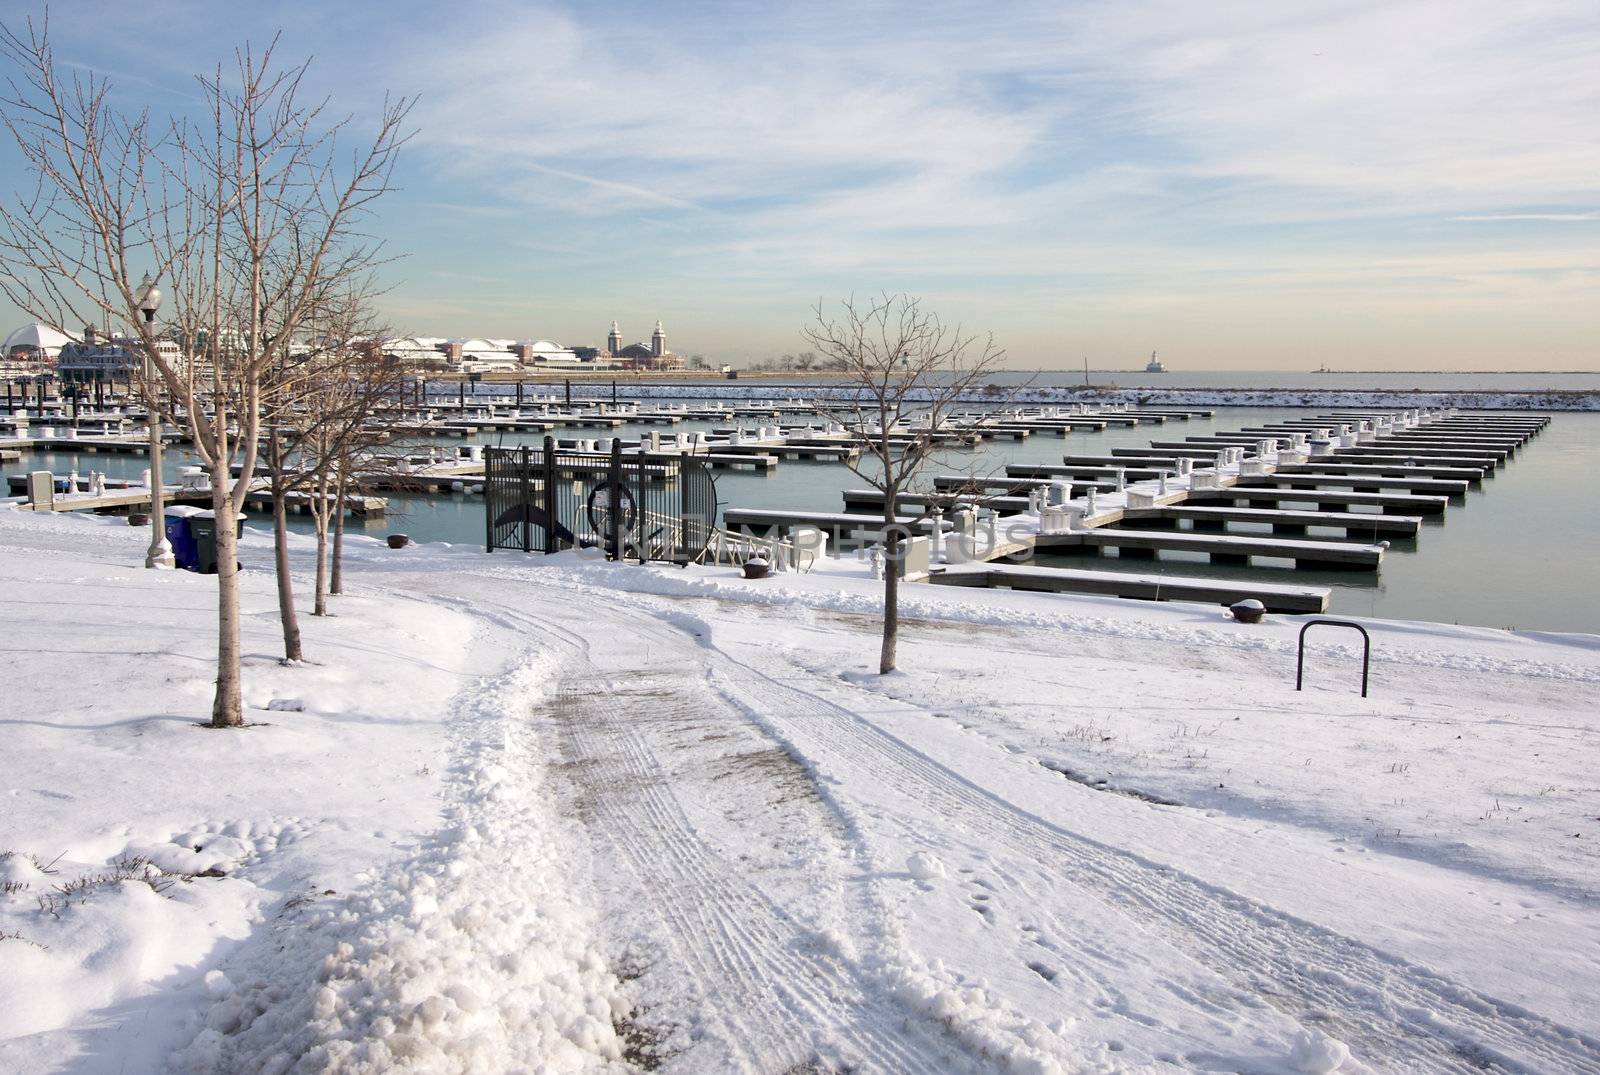 Empty Yacht Harbour on Lake Michigan in Chicago After Winter Snow